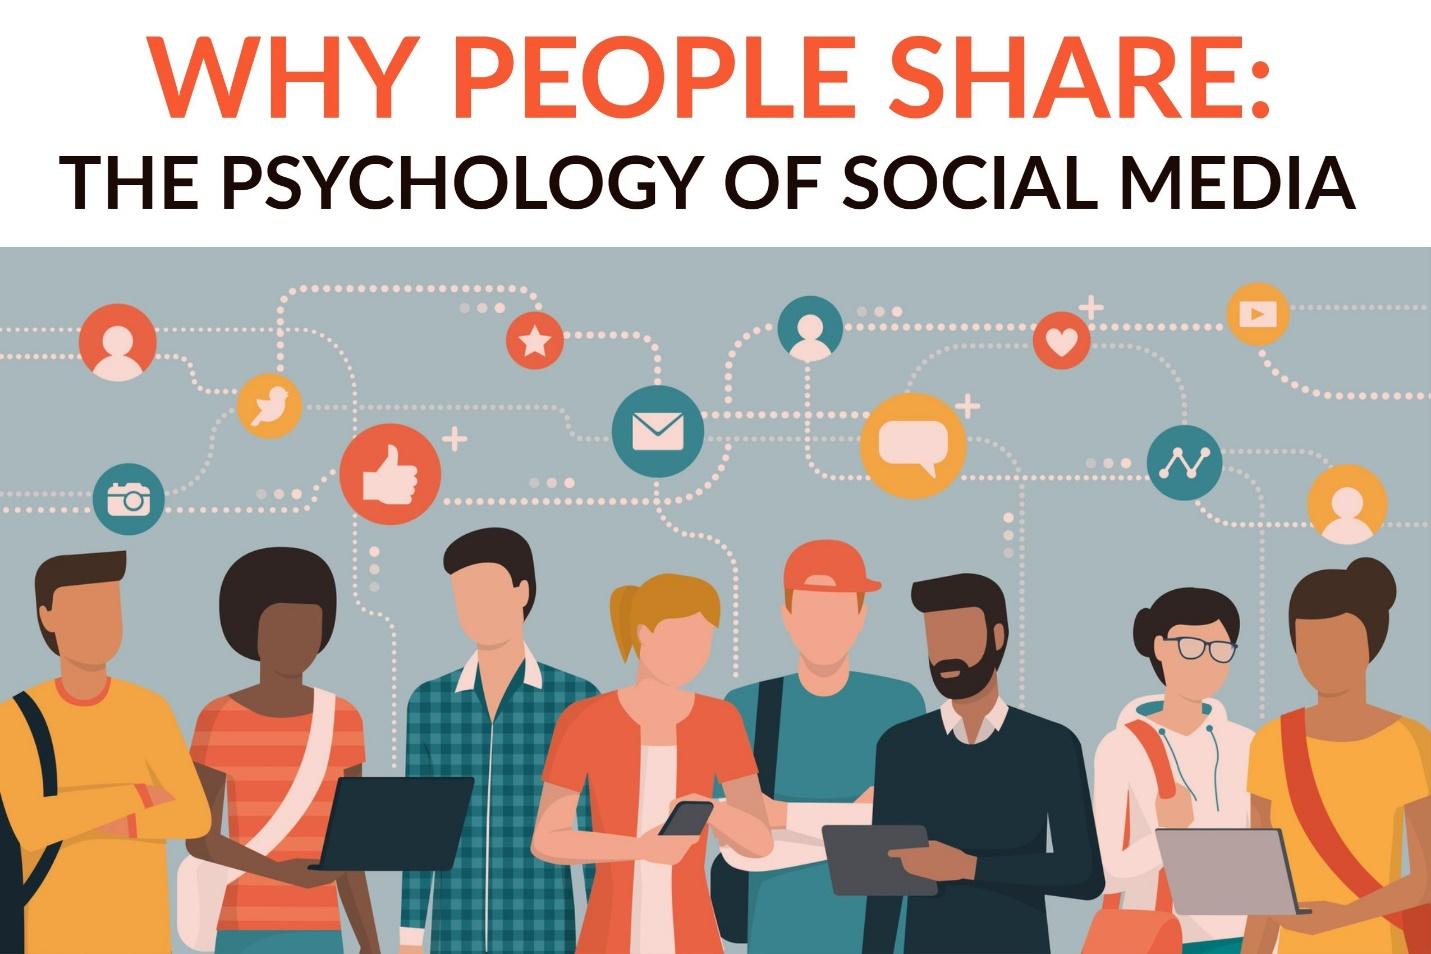 Why People Share: The Psychology of Social Media